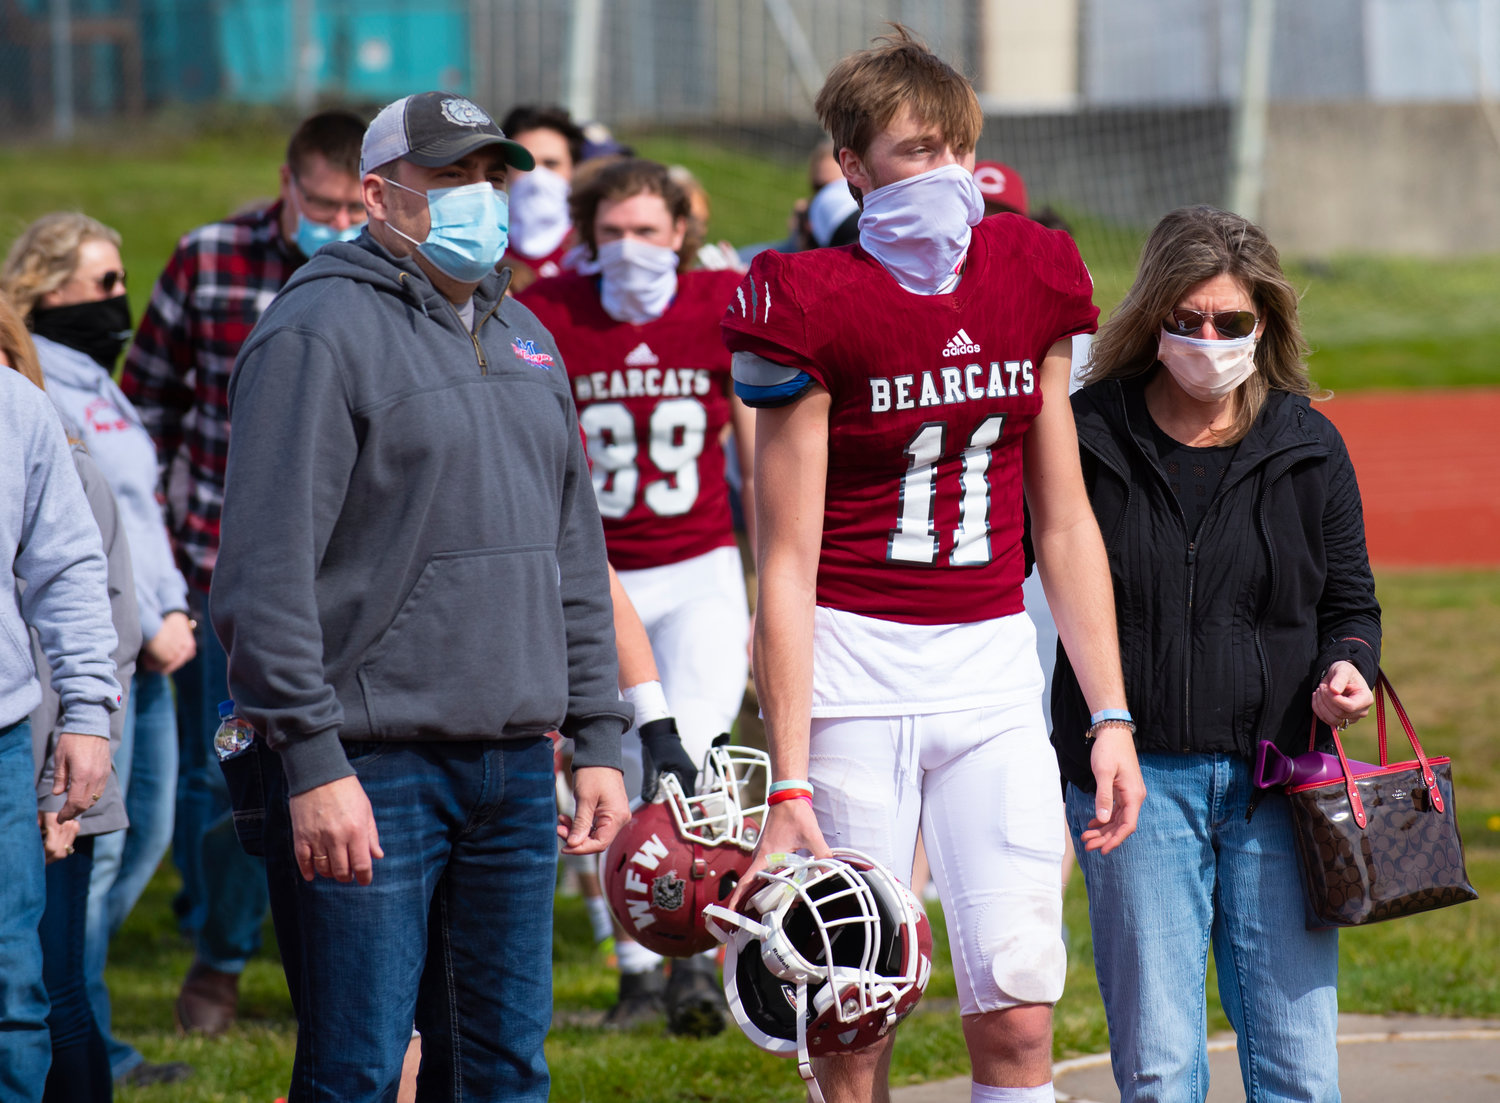 W.F. West senior Carter McCoy is honored along with all the Bearcats' senior football players and cheerleaders on Saturday.